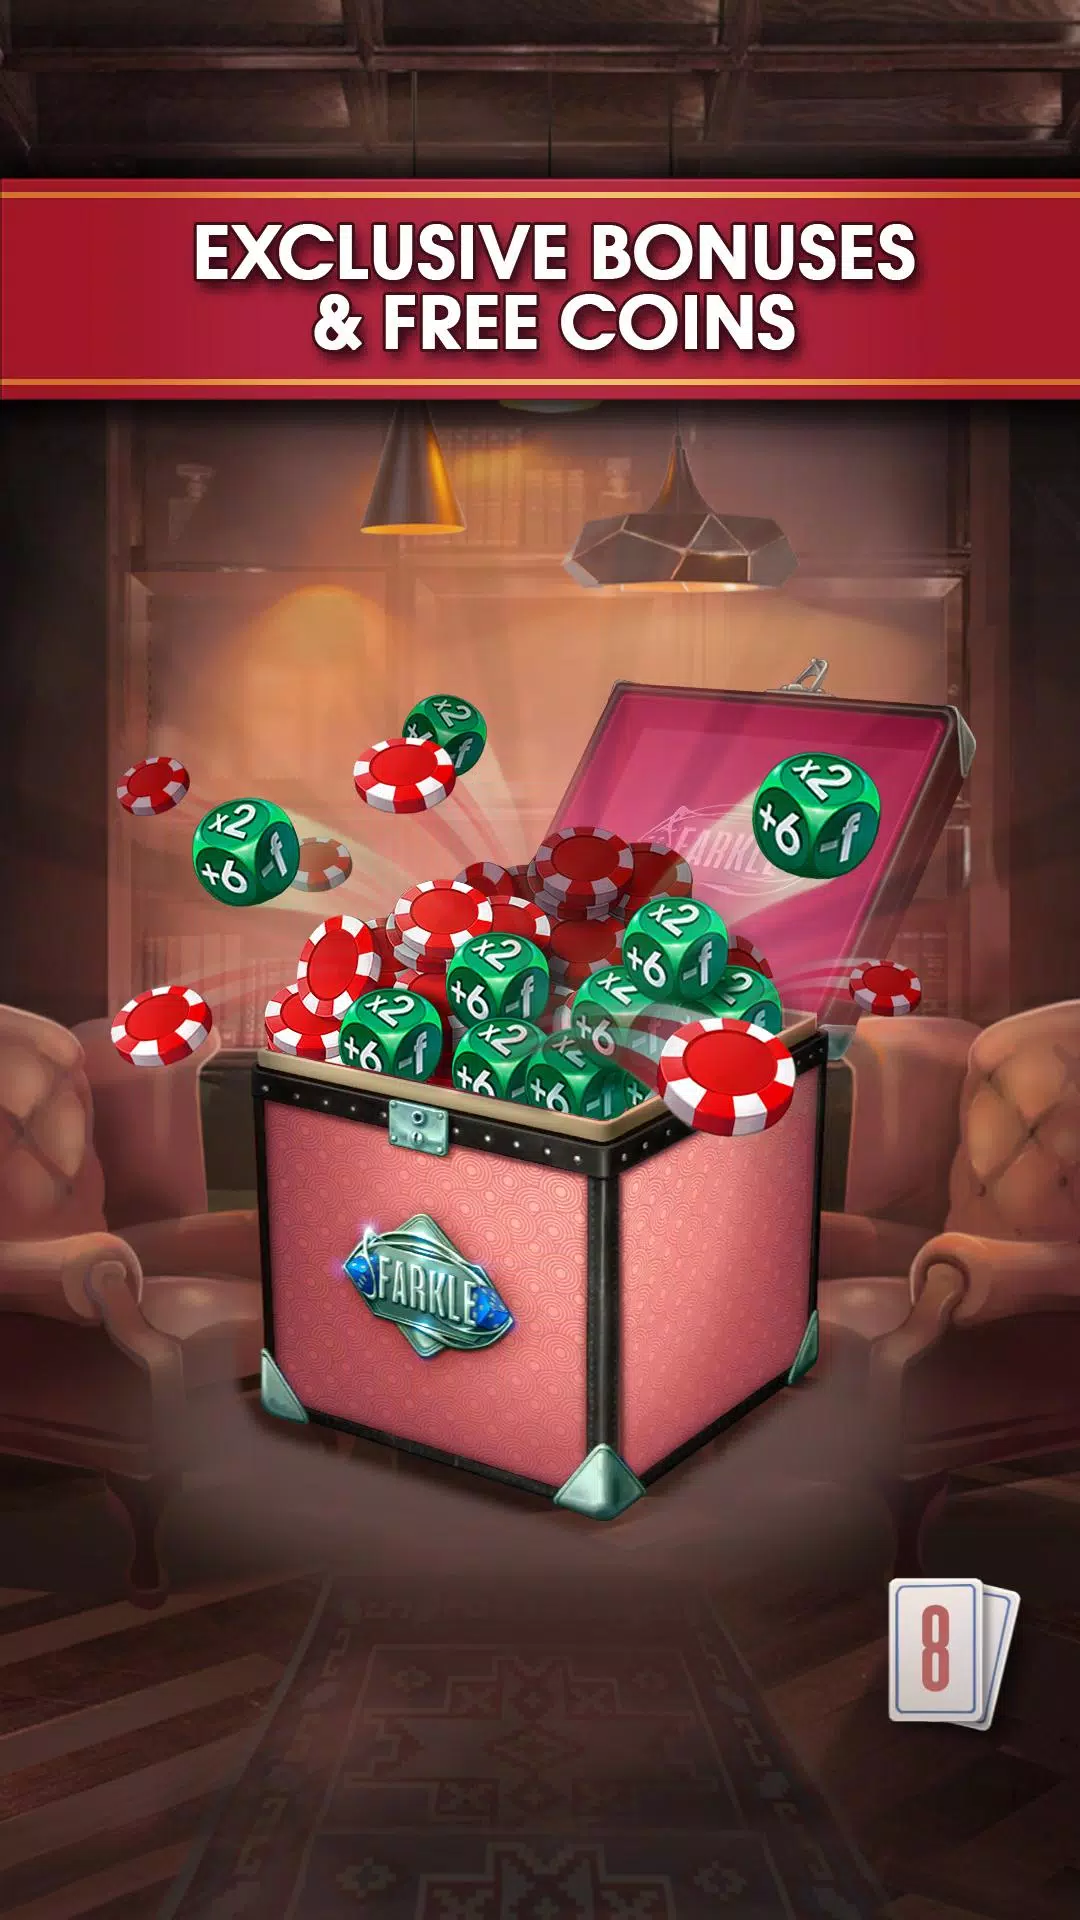 Farkle King : The Dice Game 1.0.8 Free Download